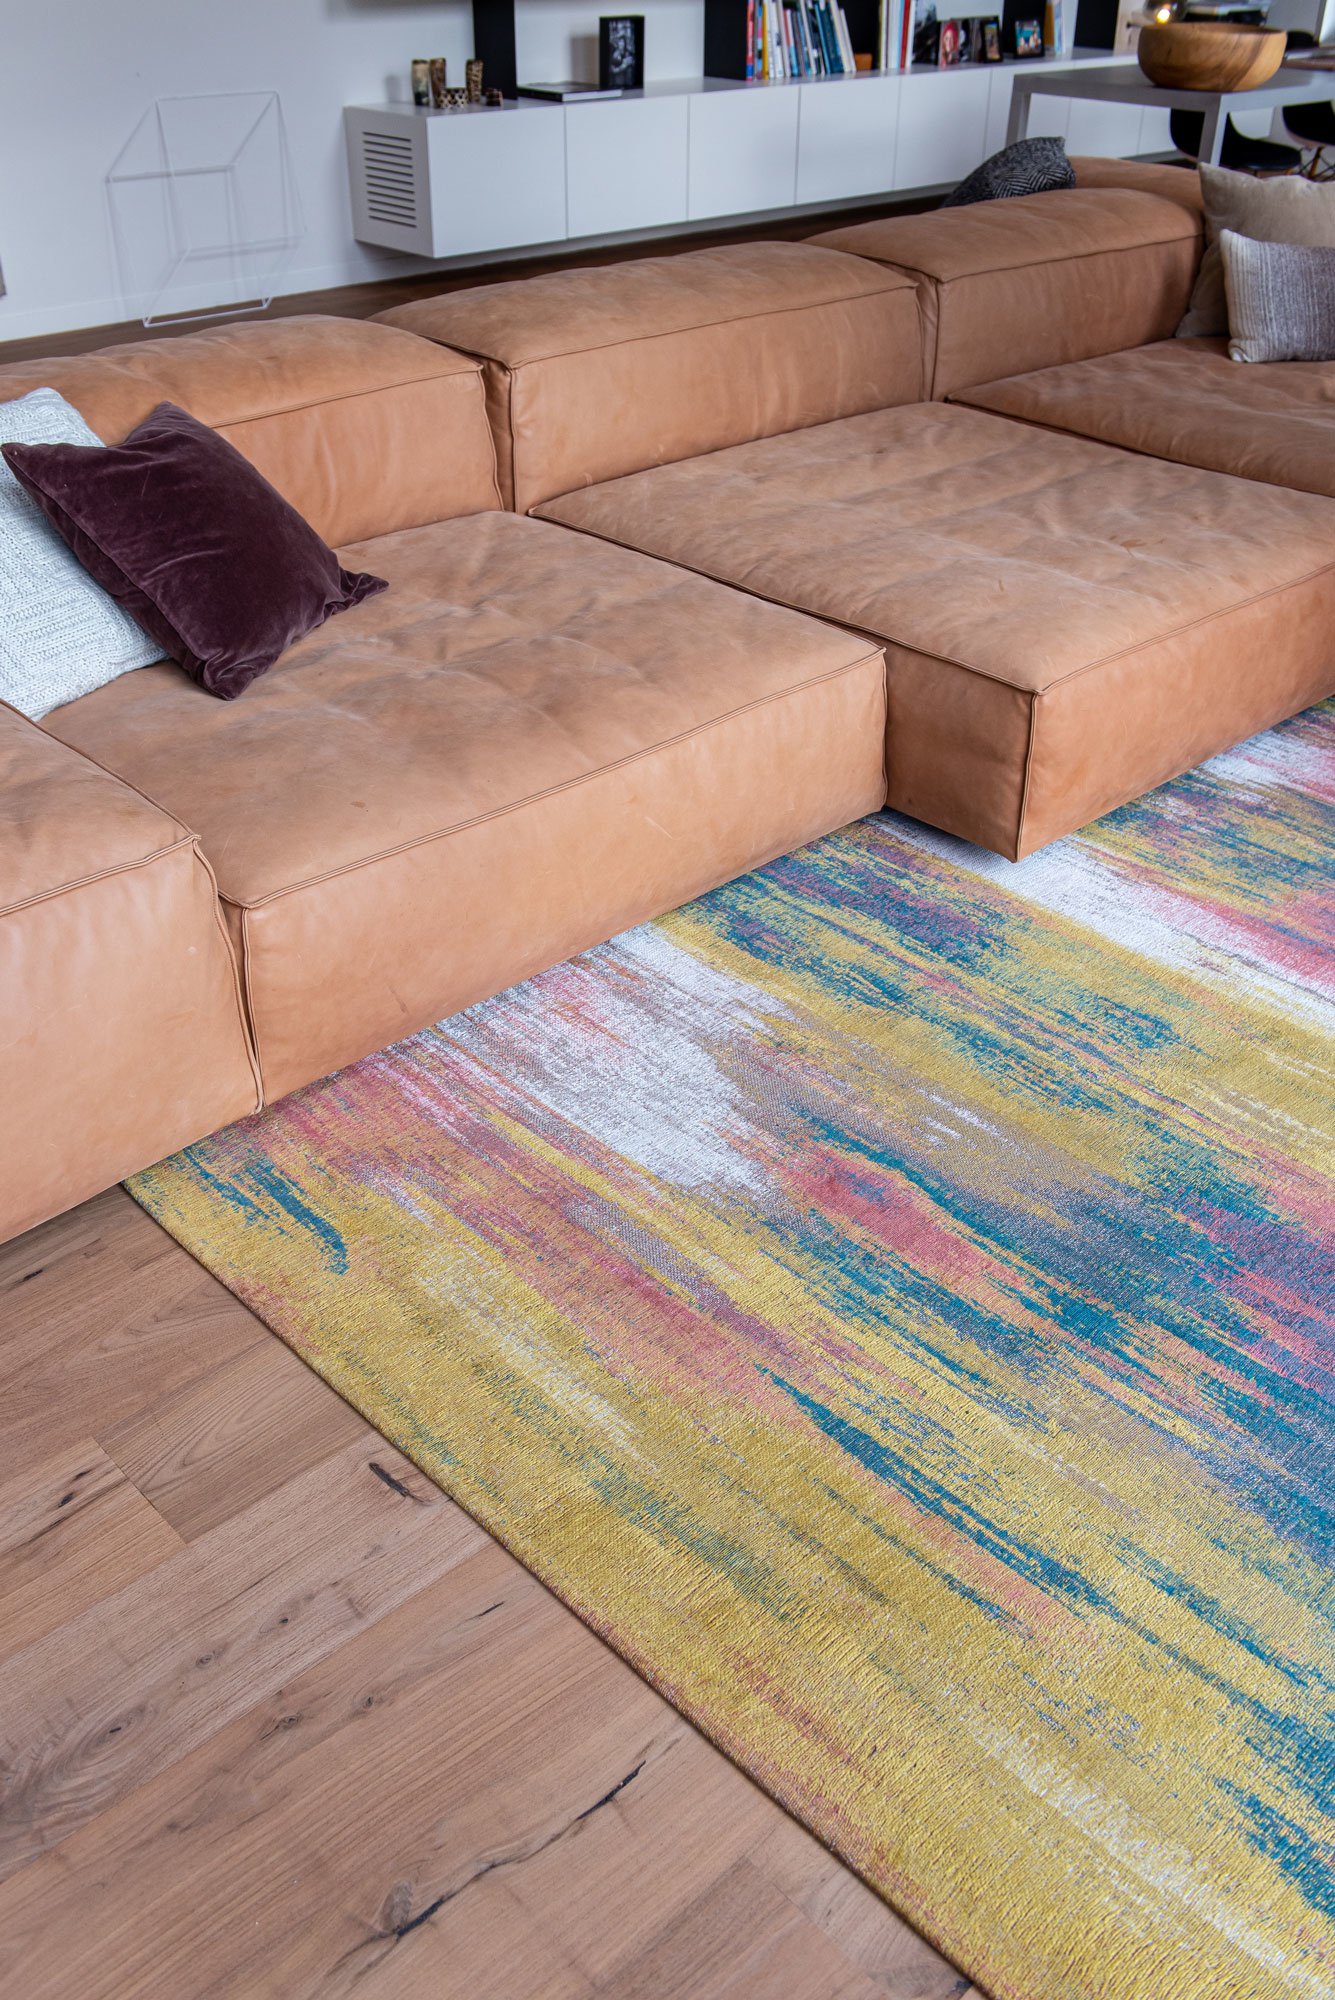 Abstract Flatwoven Mix Rug ☞ Size: 2' 7" x 5' (80 x 150 cm)